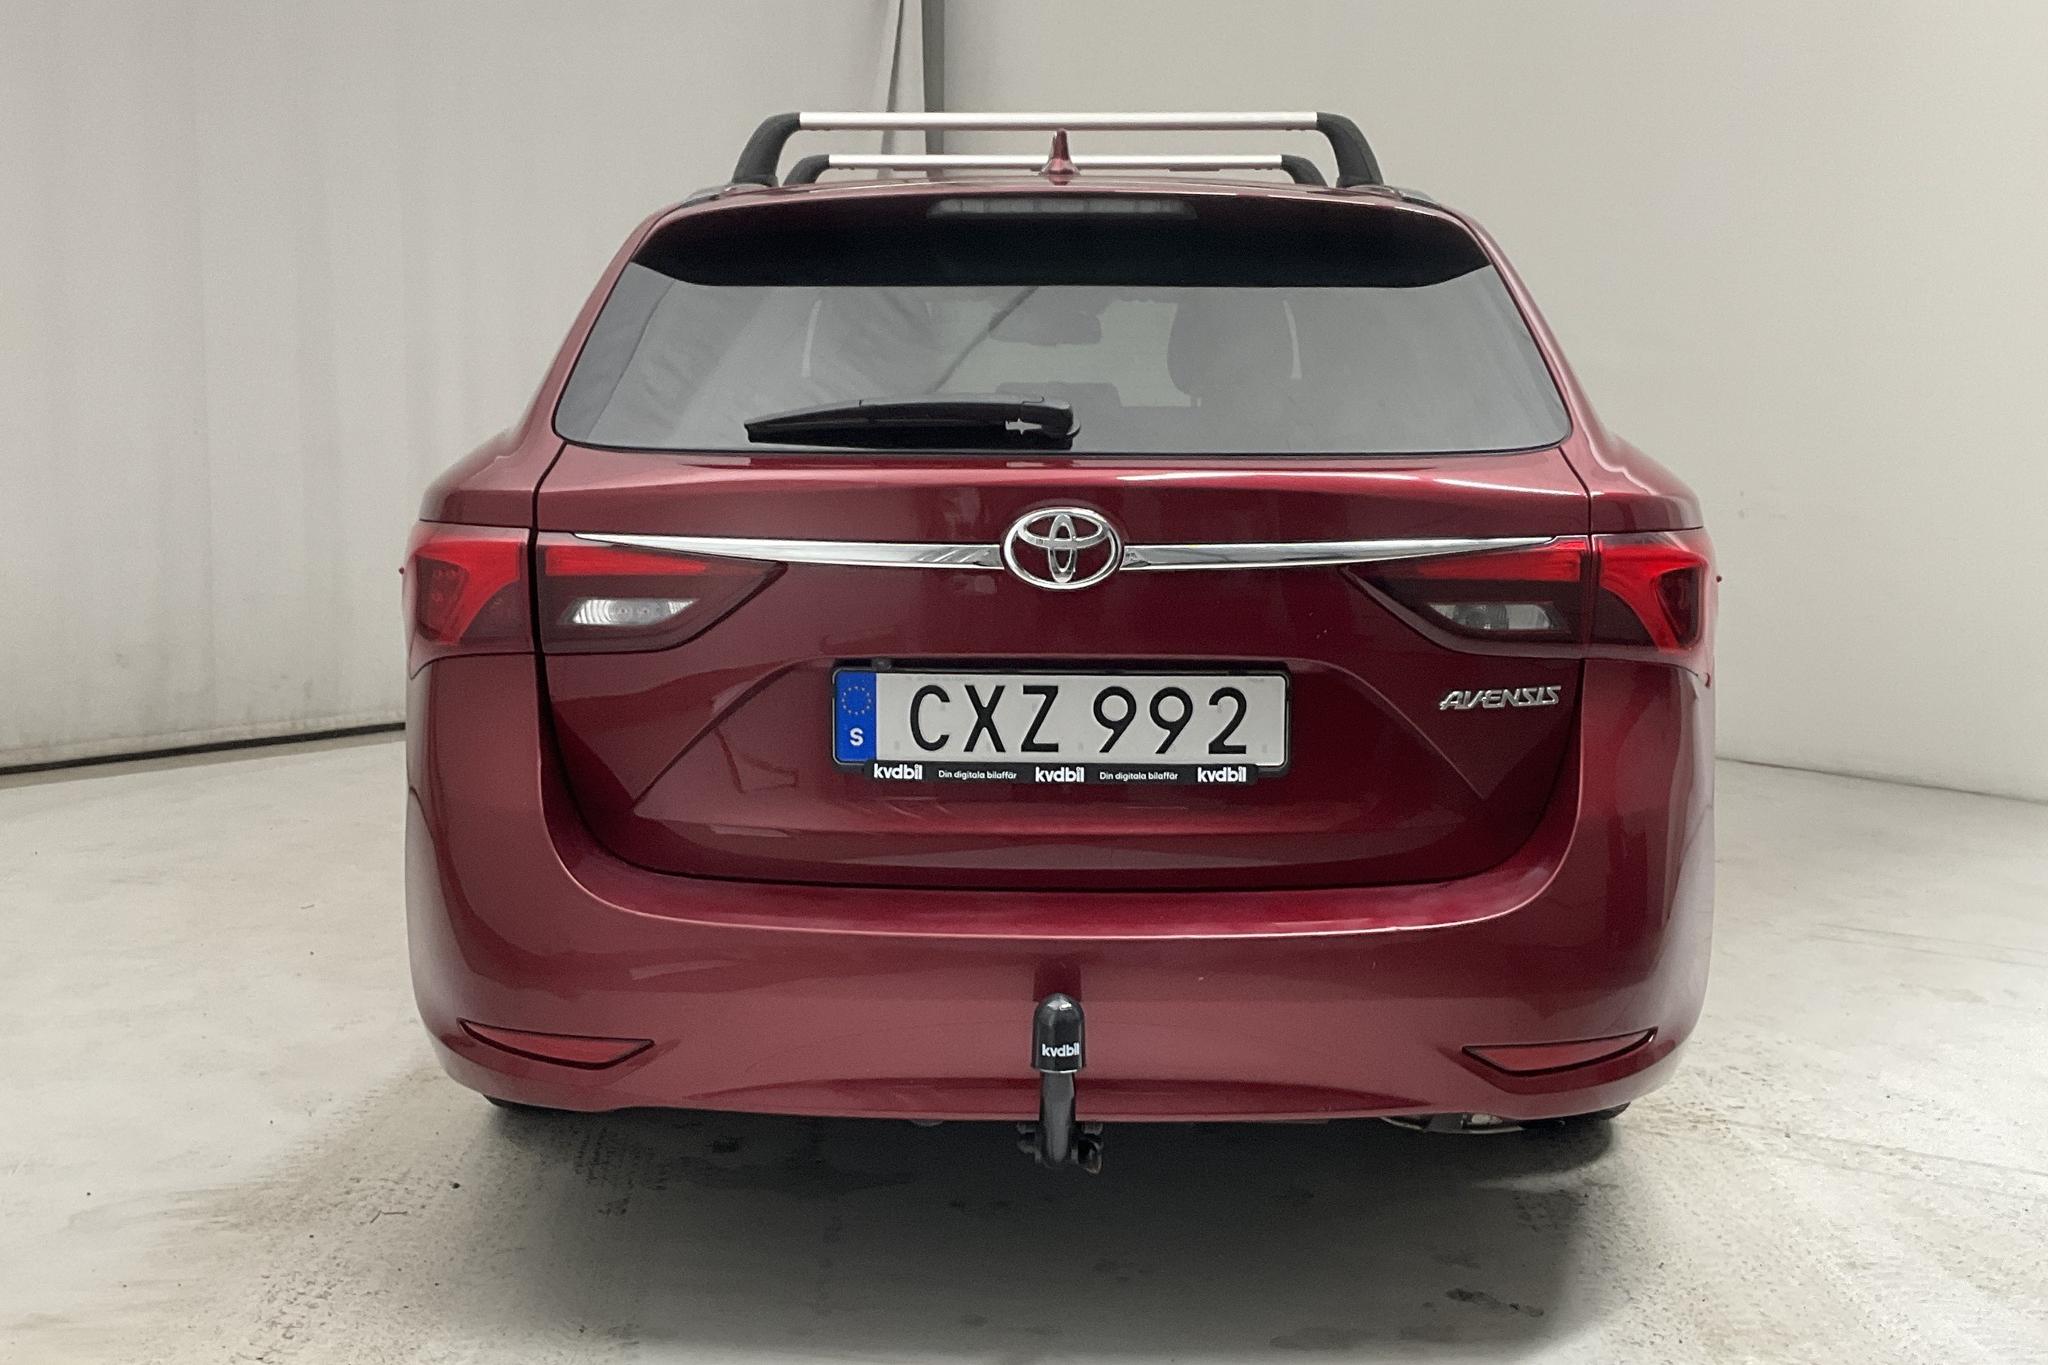 Toyota Avensis 1.8 Valvematic (147hk) - 68 790 km - Automatic - red - 2017